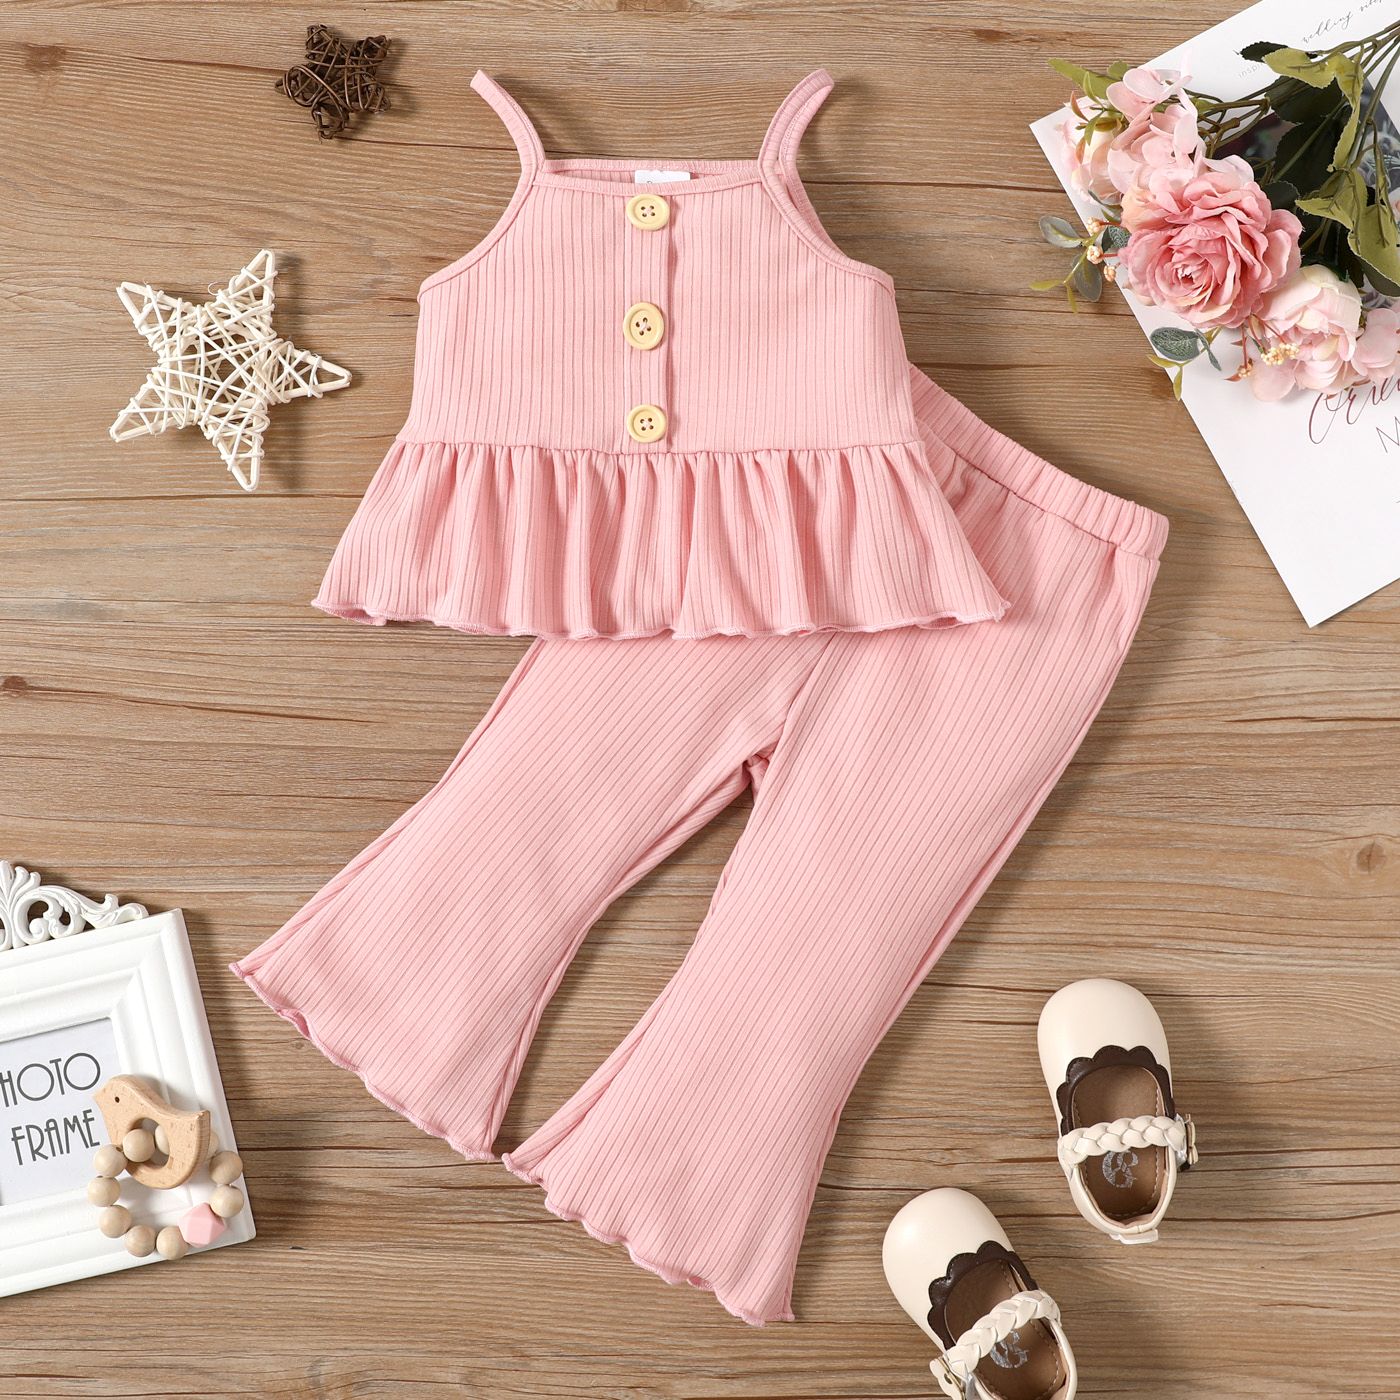 2pcs Baby Girl Solid Spaghetti Strap Peplum Top And Flared Pants Set